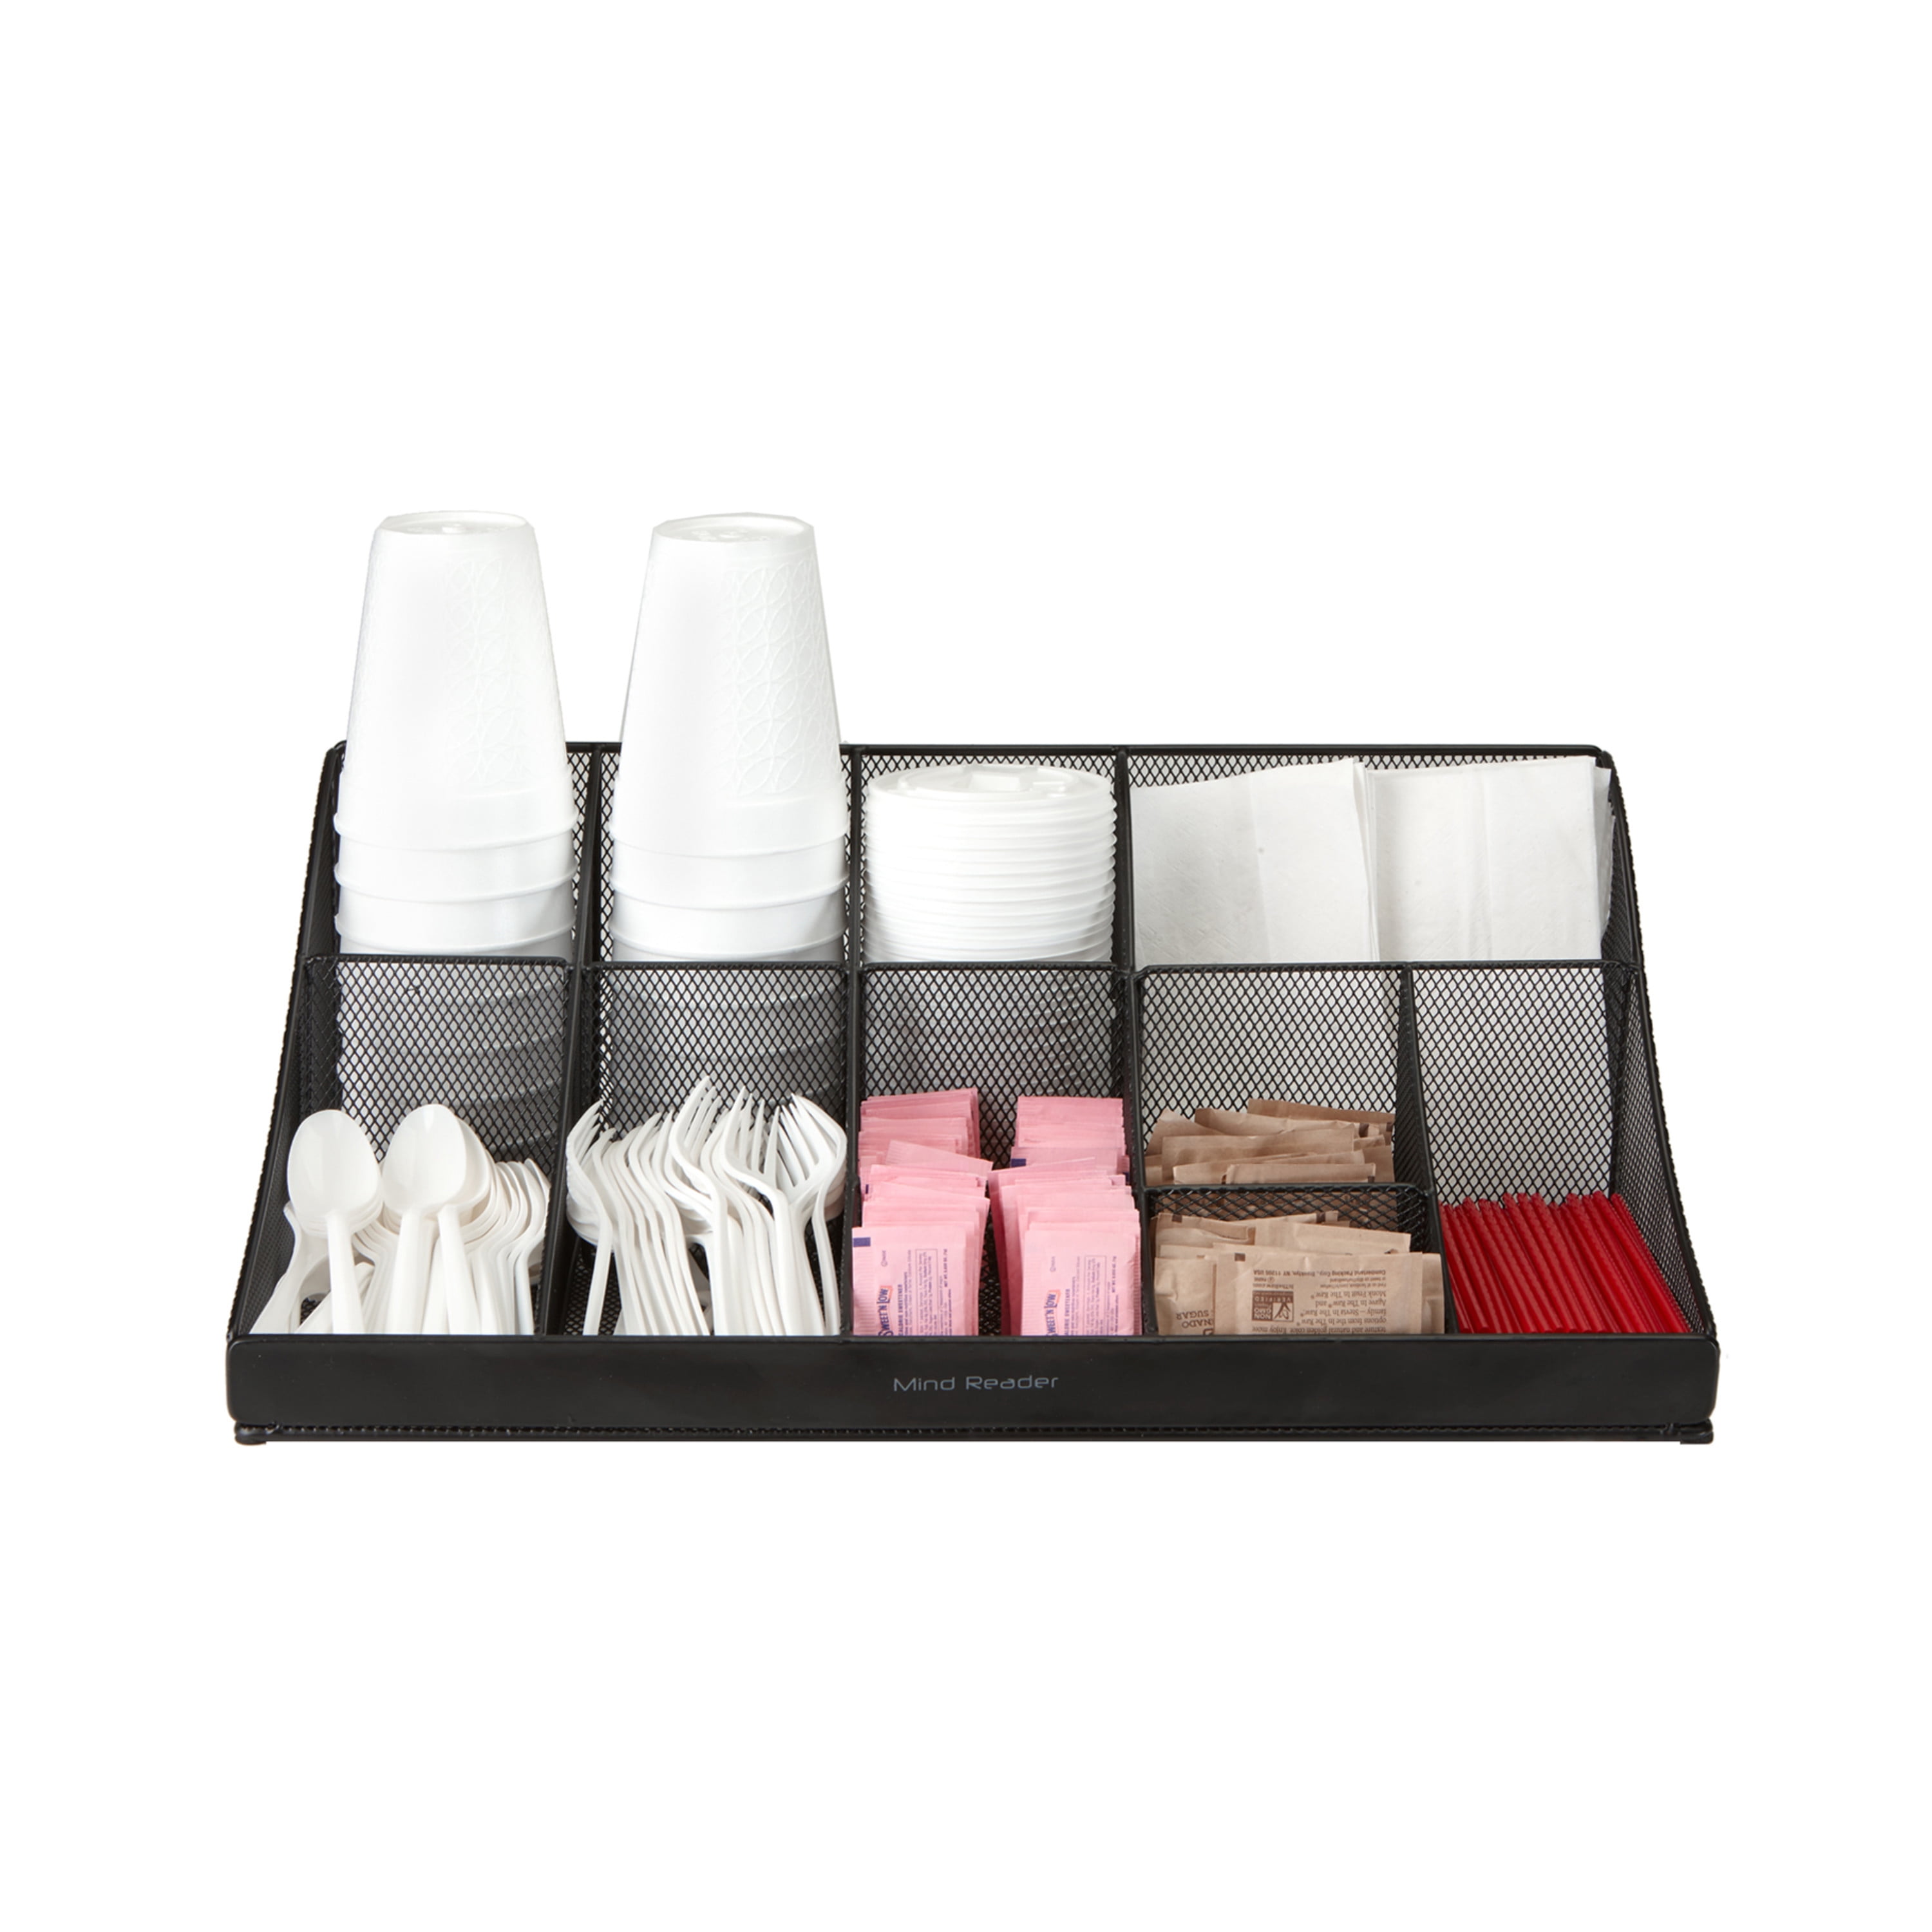 G.E.T. 5-Compartment Metal Table Top Caddy and Condiment Organizer, 9 inch x 7 inch, Black